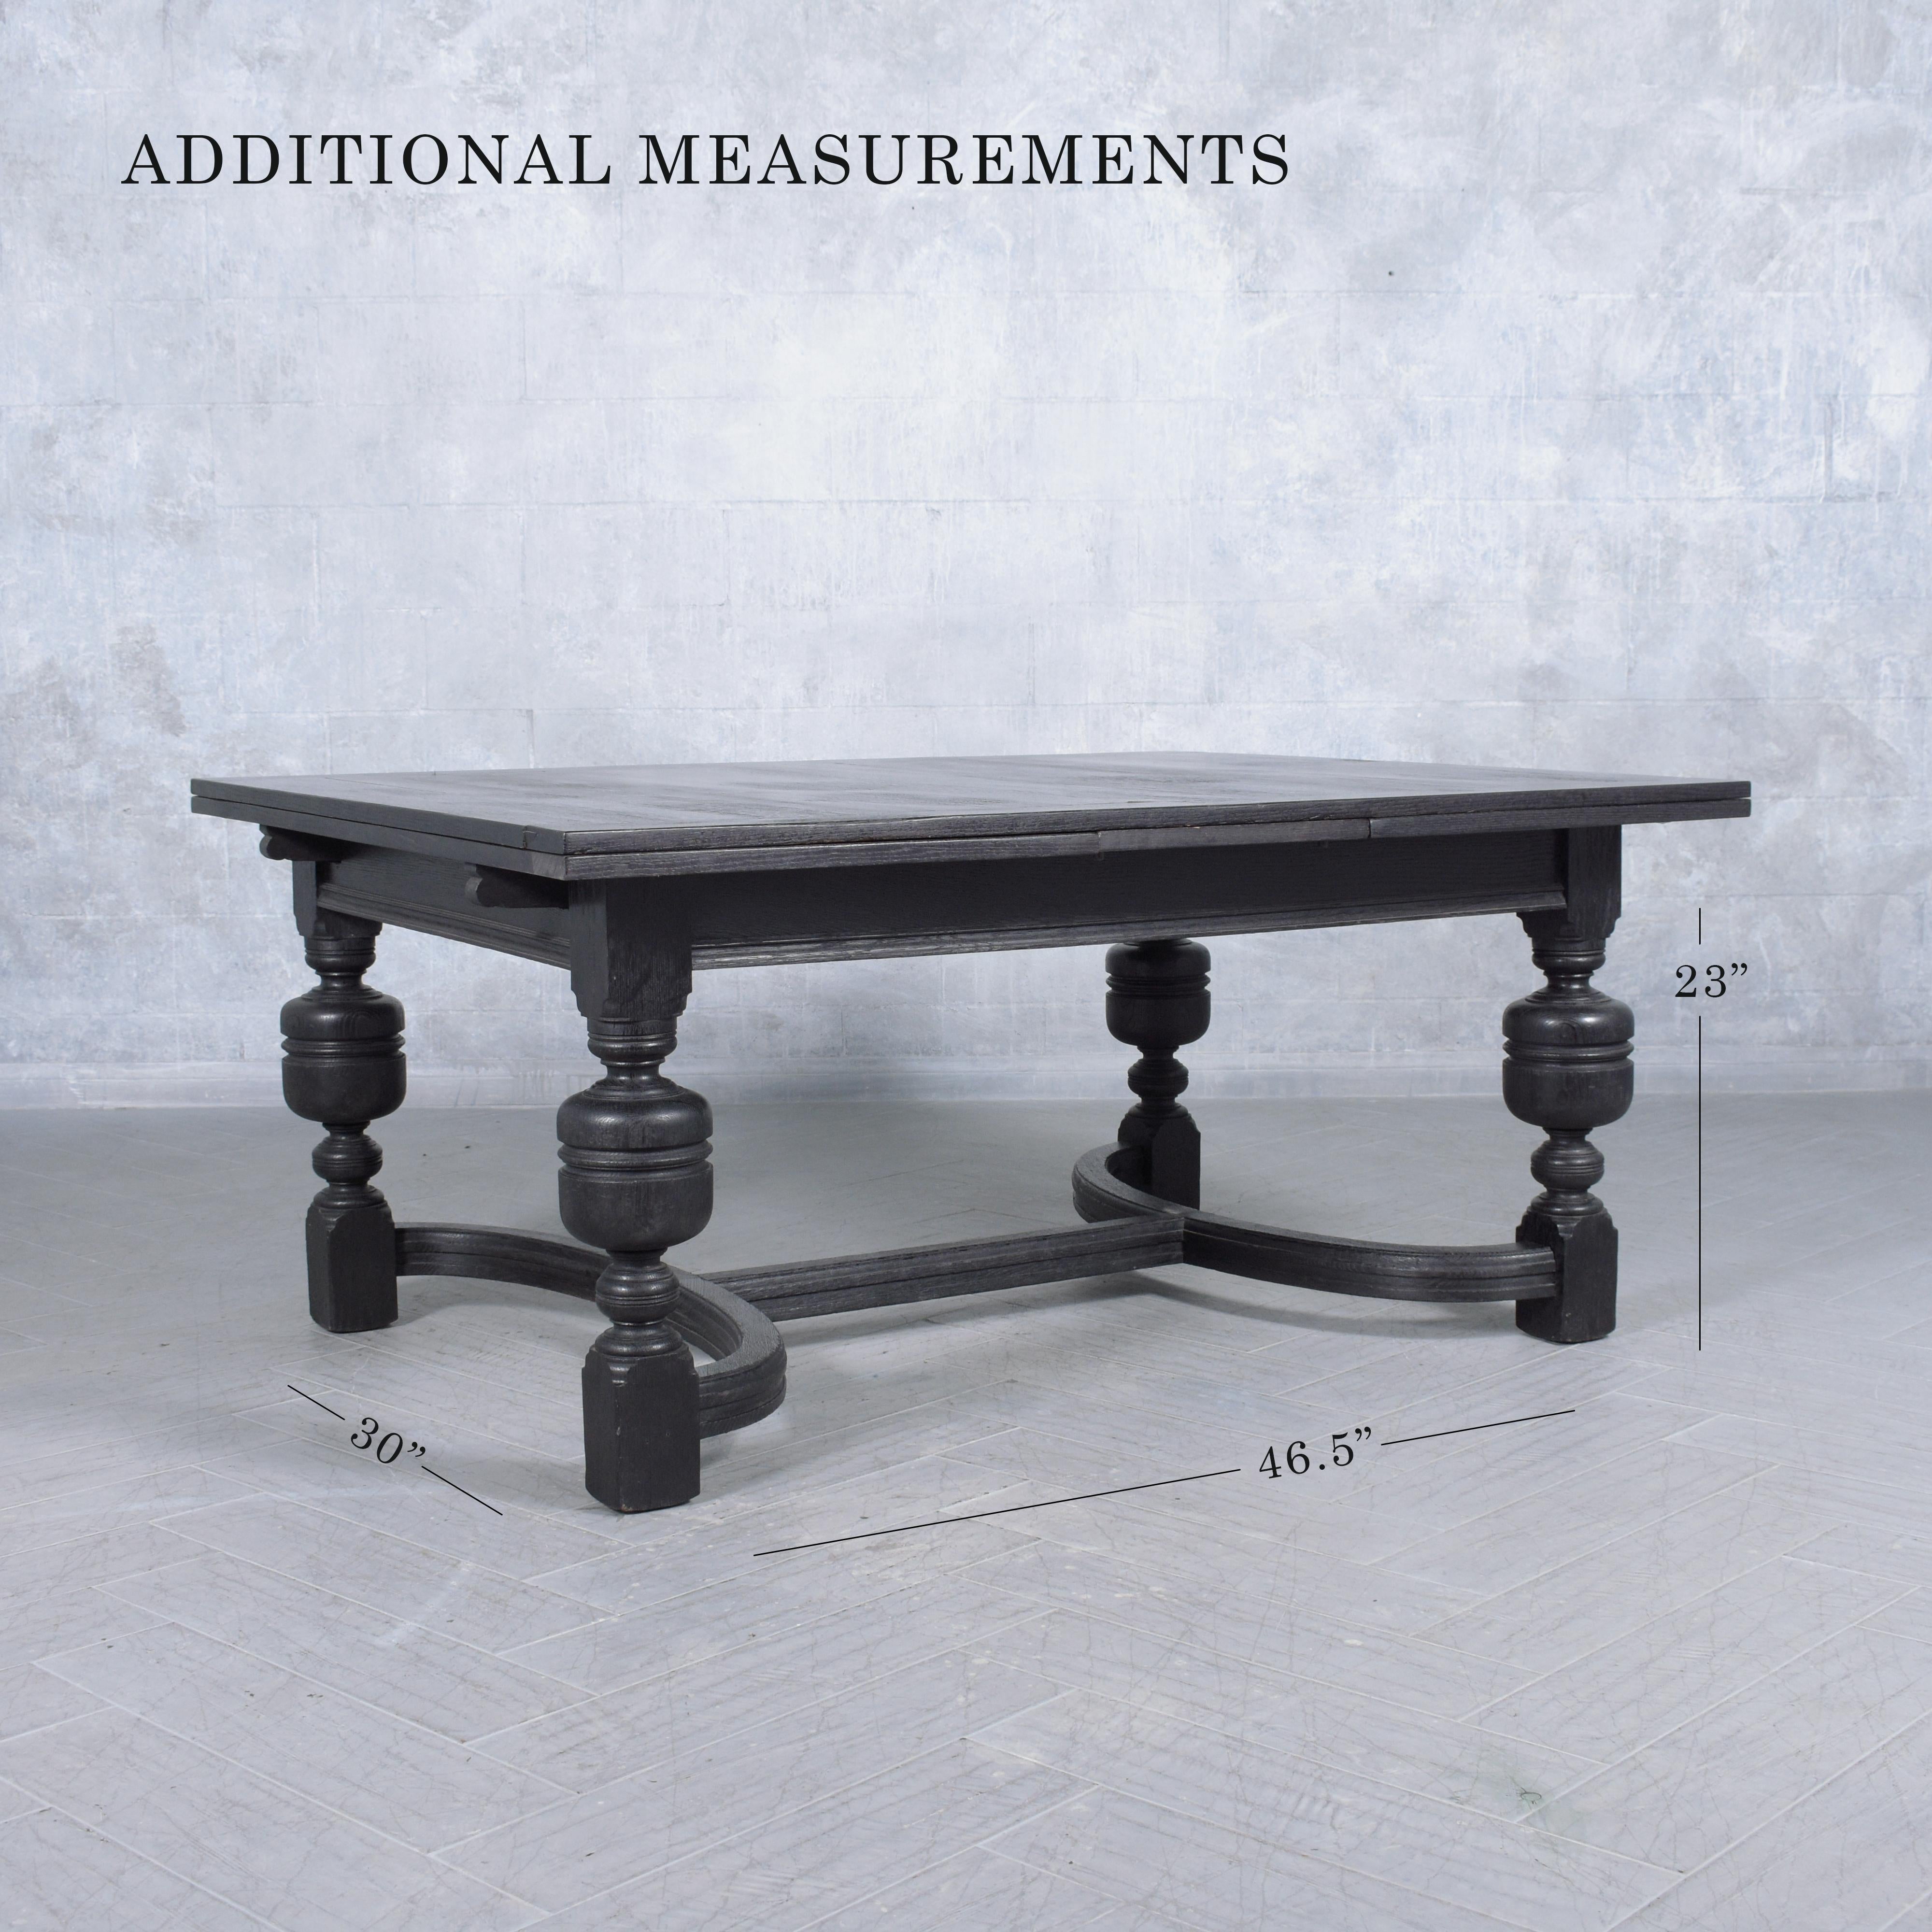 1850s Spanish Extendable Dining Table: Ebonized Solid Wood with French Design For Sale 9